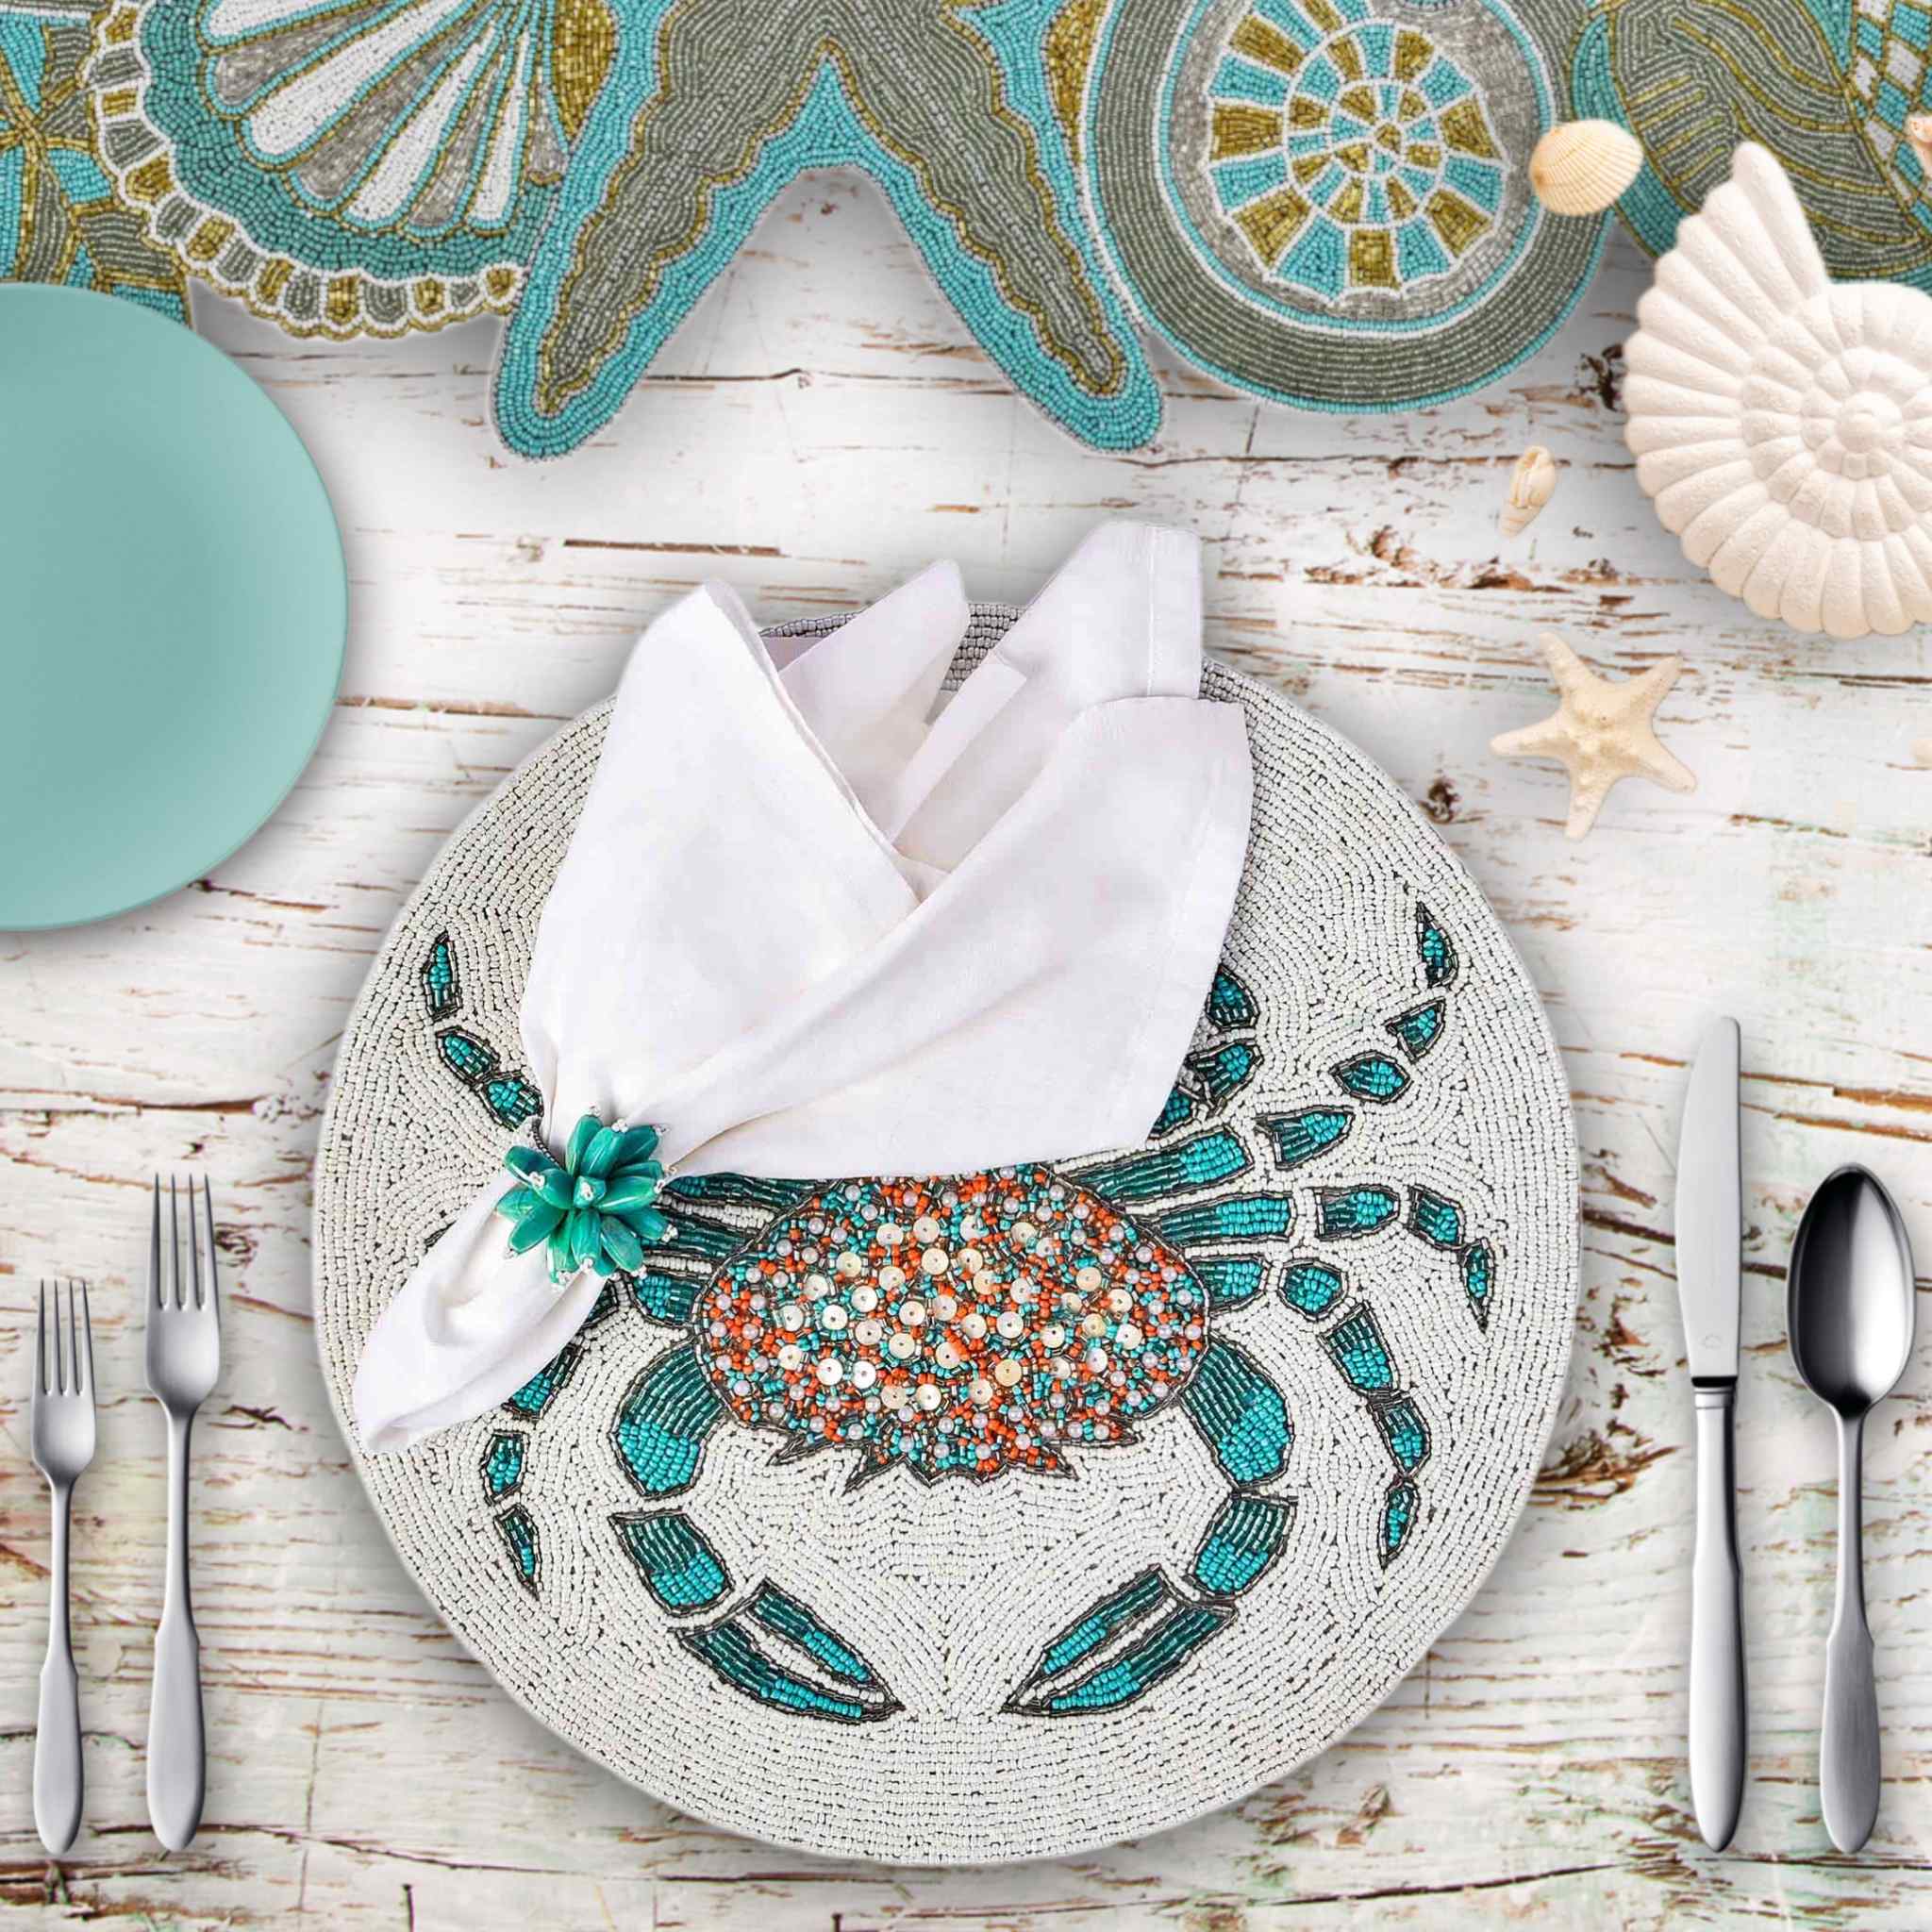 Stay Salty Table Setting for 4 - Embroidered Placemats, Napkin Rings & Table Runner in Cream & Teal